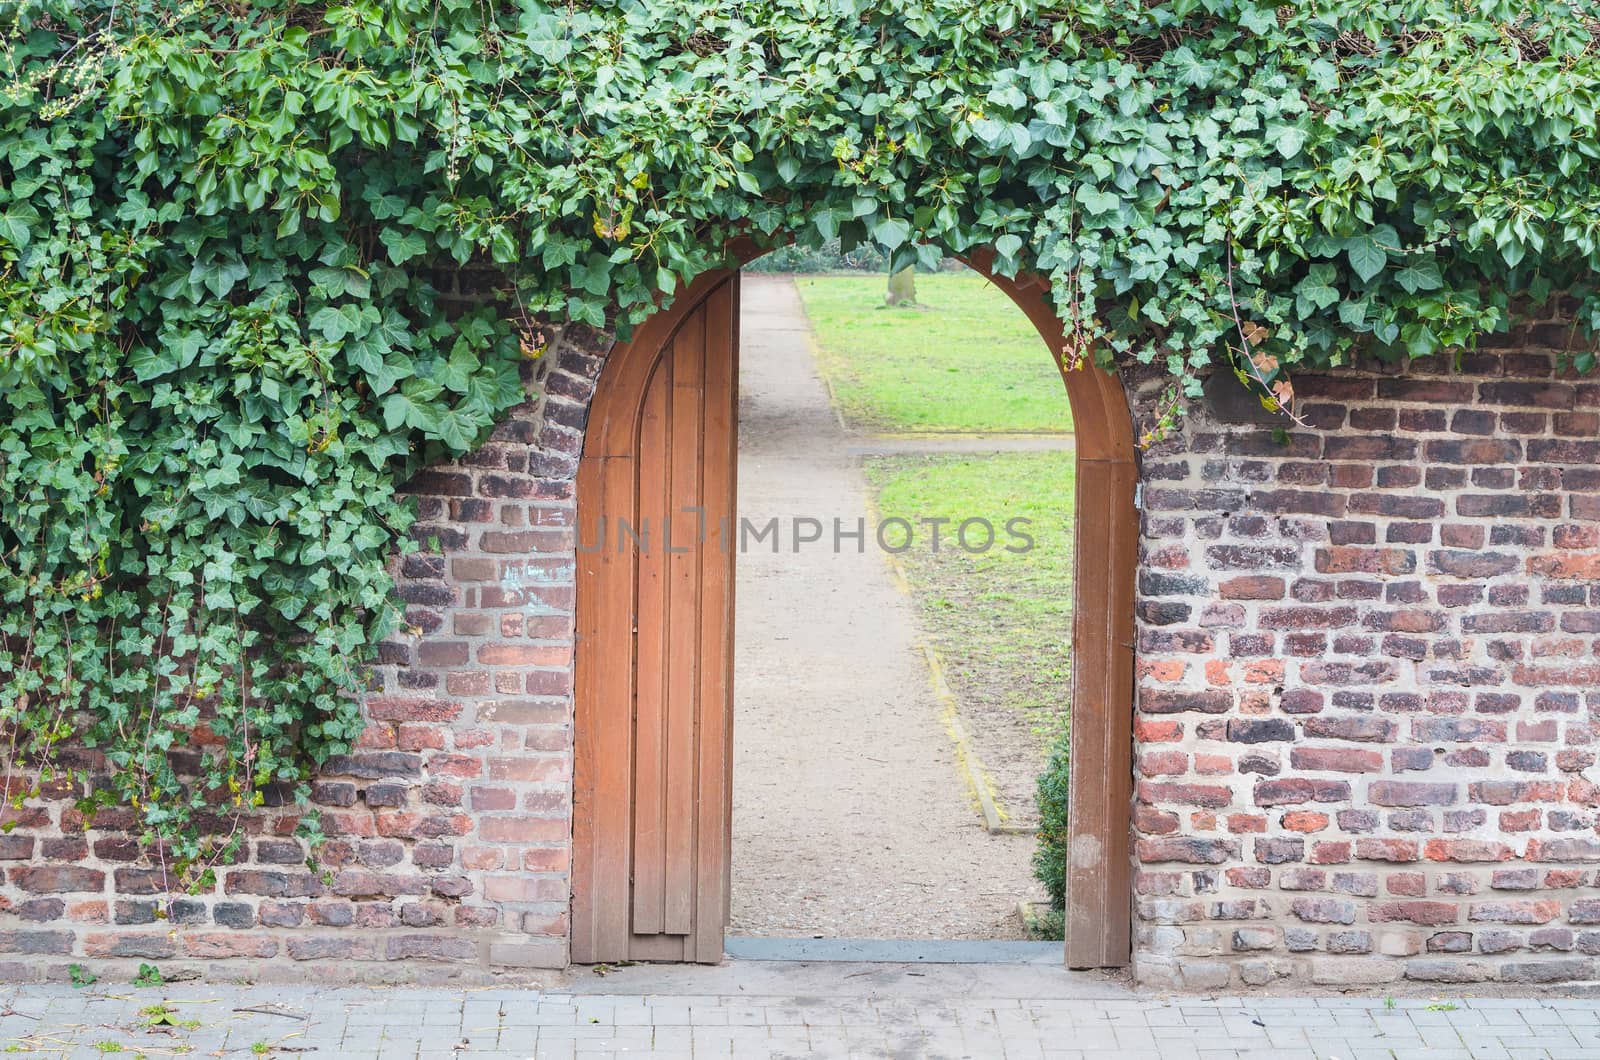 An entrance gate in a wall into a park. Behind the open door is a way.
